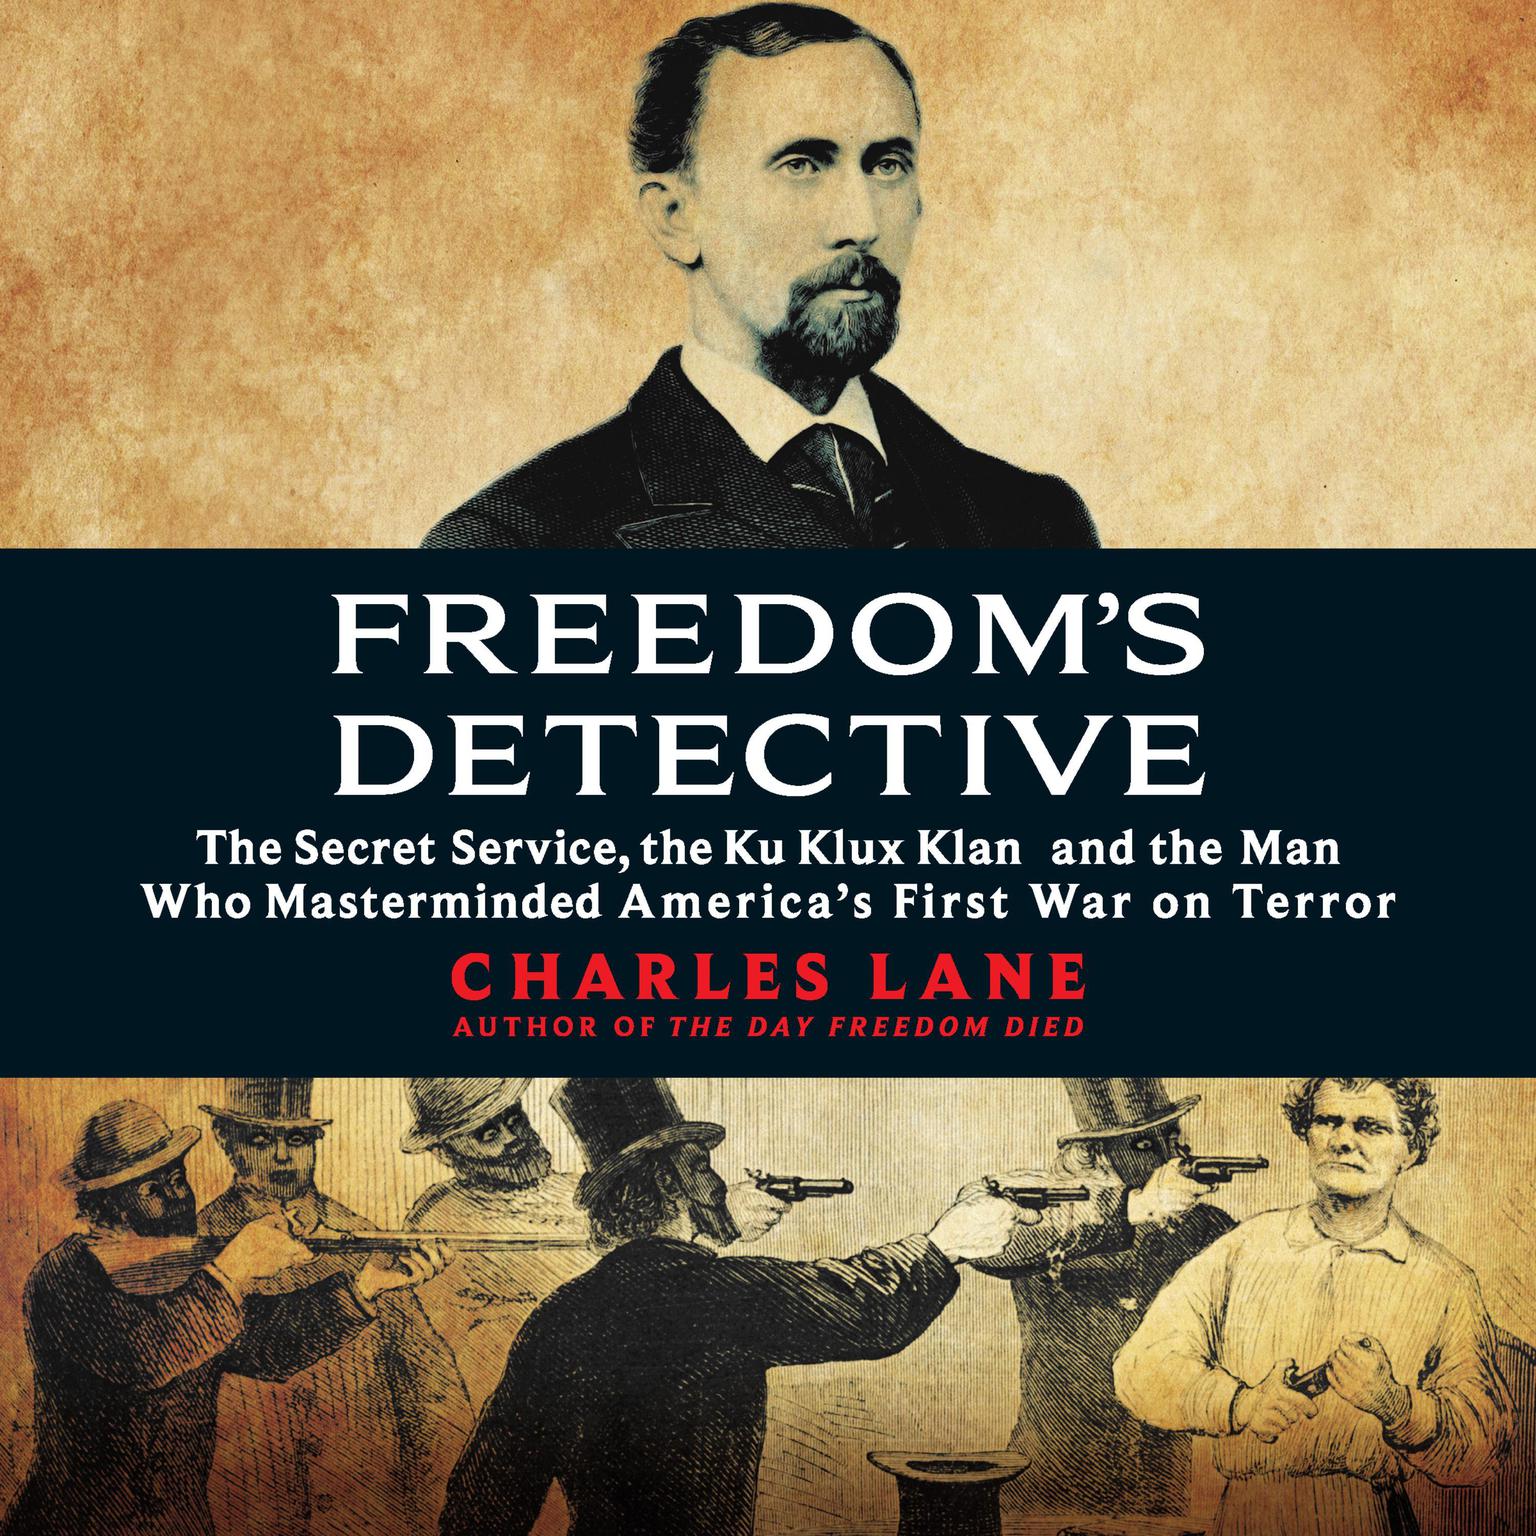 Freedoms Detective: The Secret Service, the Ku Klux Klan, and the Man Who Masterminded America’s First War on Terror Audiobook, by Charles Lane